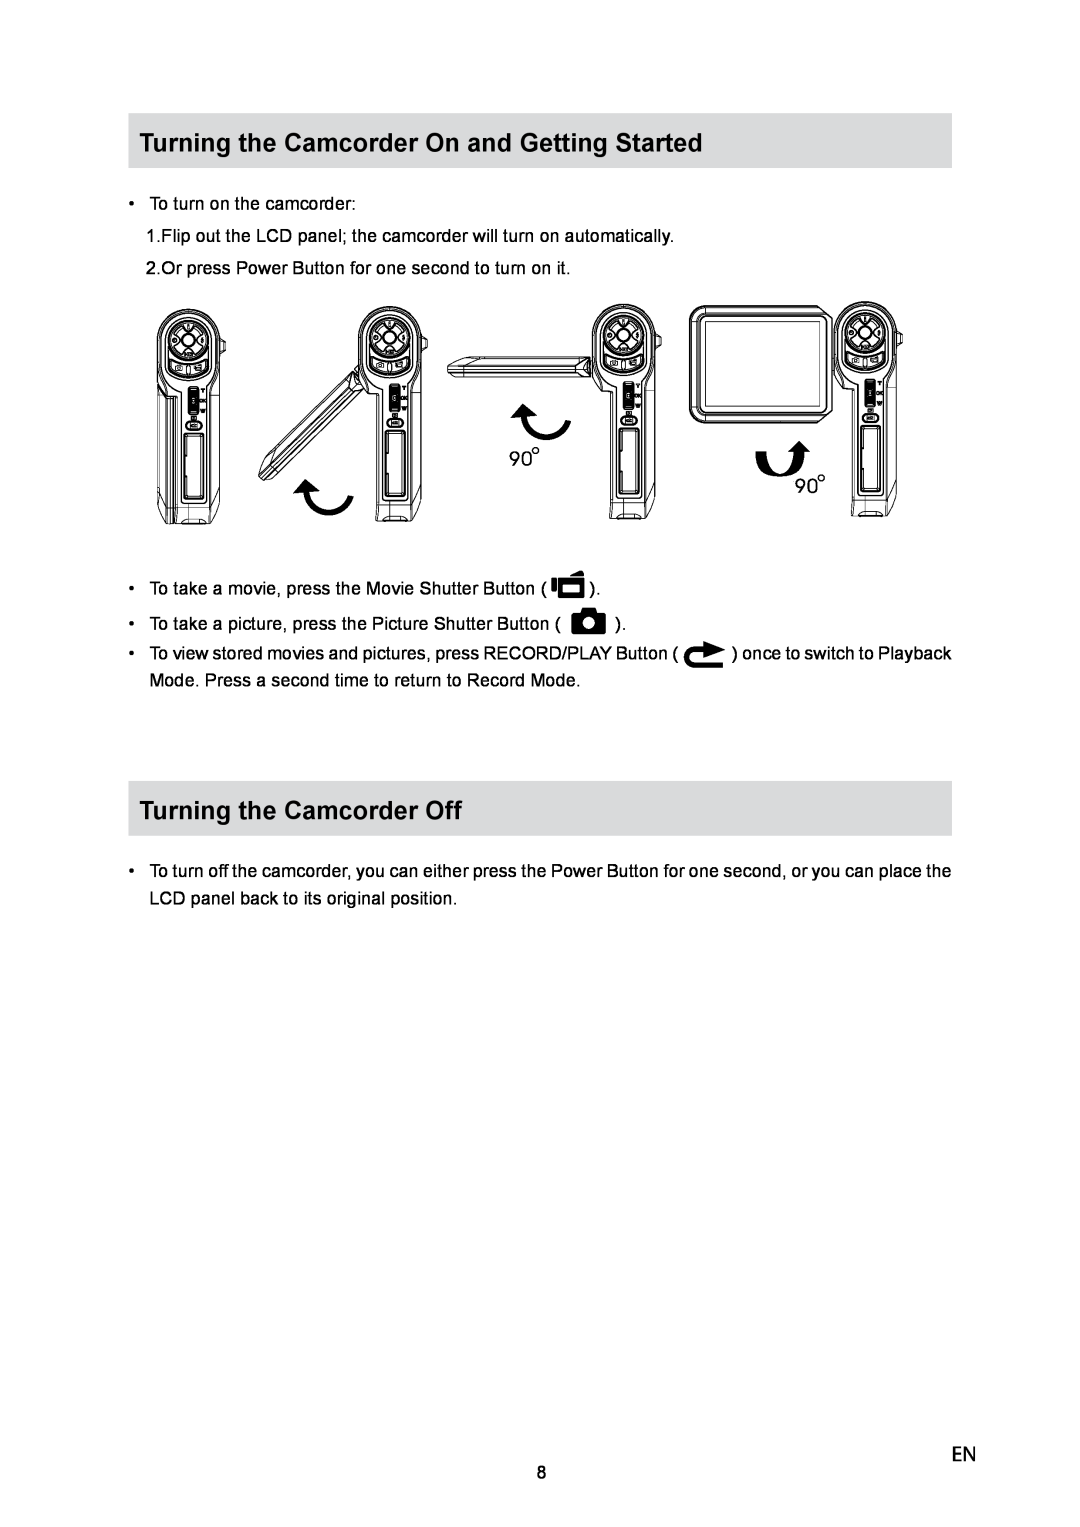 Toshiba P10 user manual Turning the Camcorder On and Getting Started, Turning the Camcorder Off 